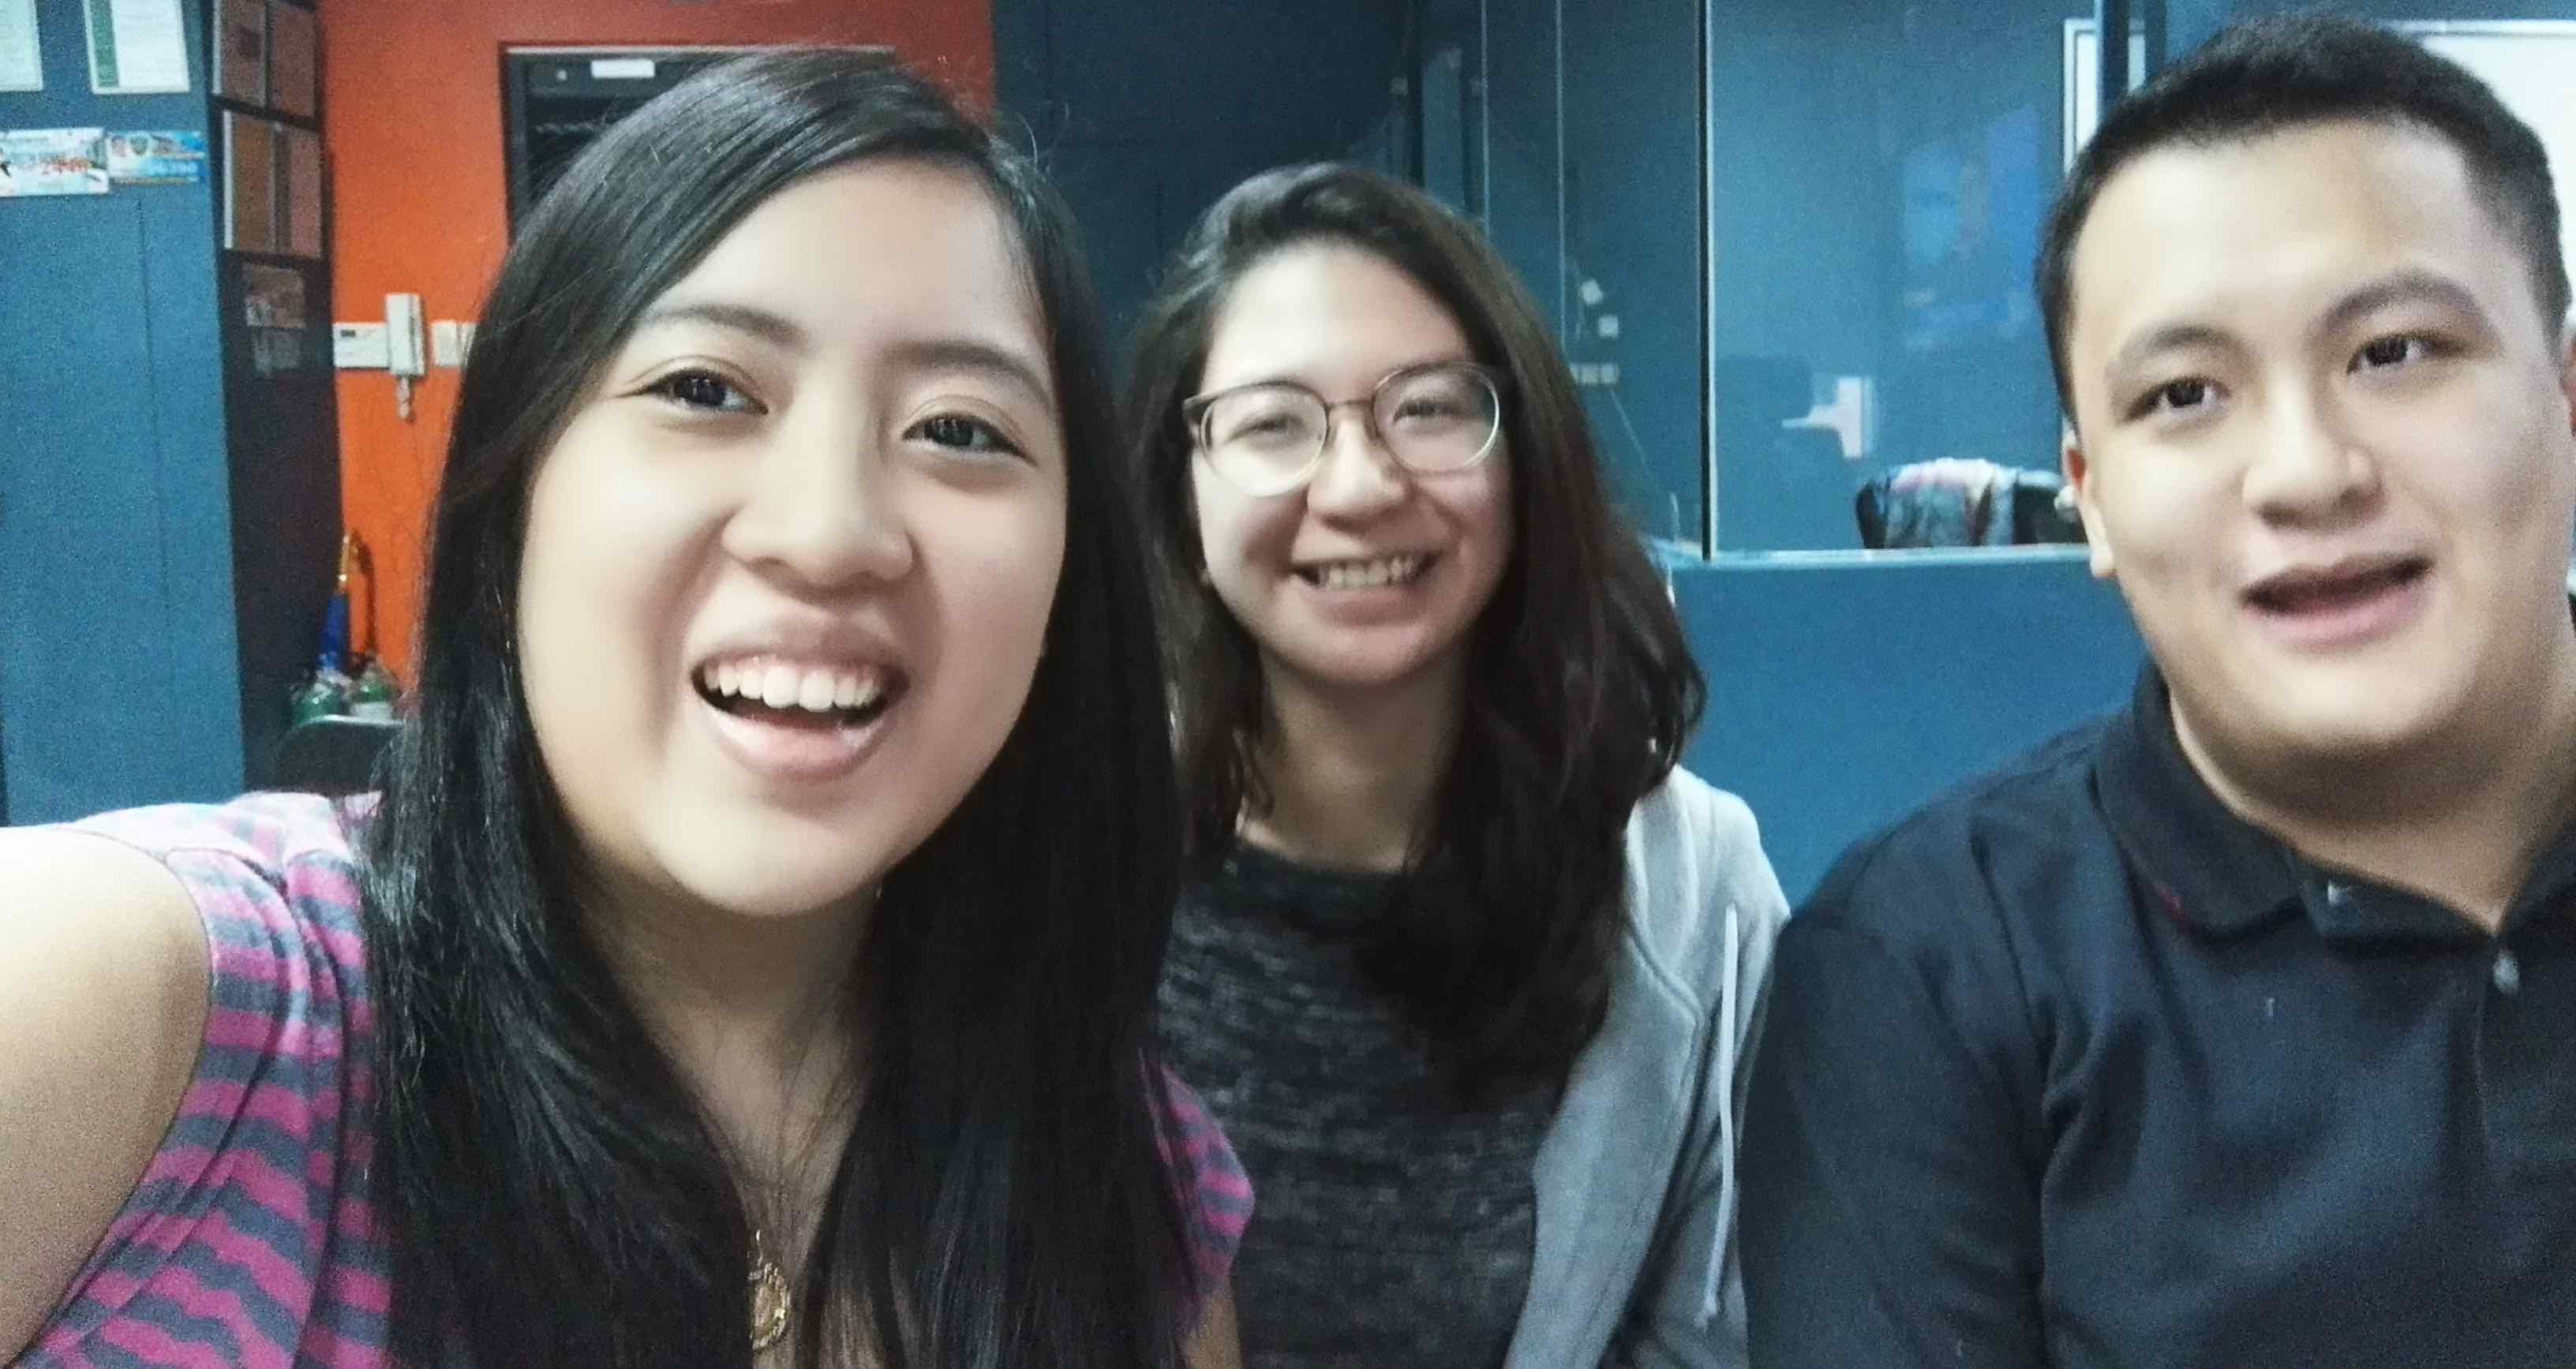 WORKING IT. A selfie with workmates taken using Beauty mode with no filter.  